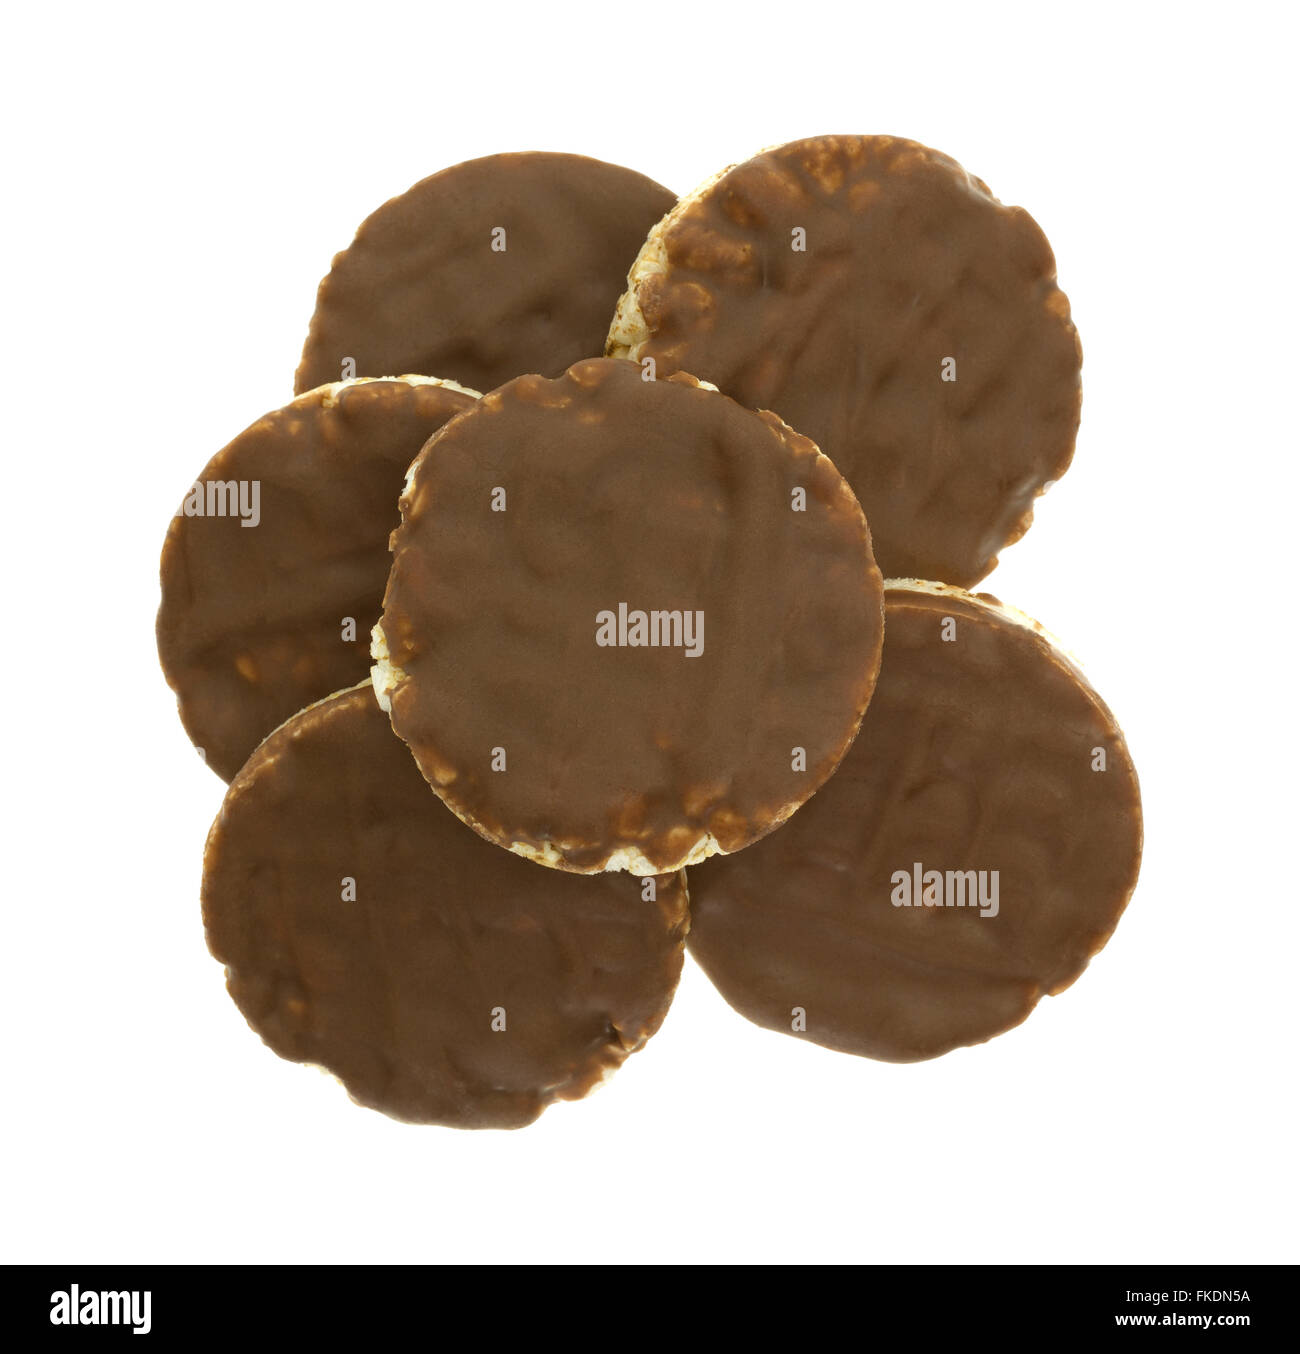 Top view of a group of organic rice cookies with milk chocolate icing isolated on a white background. Stock Photo